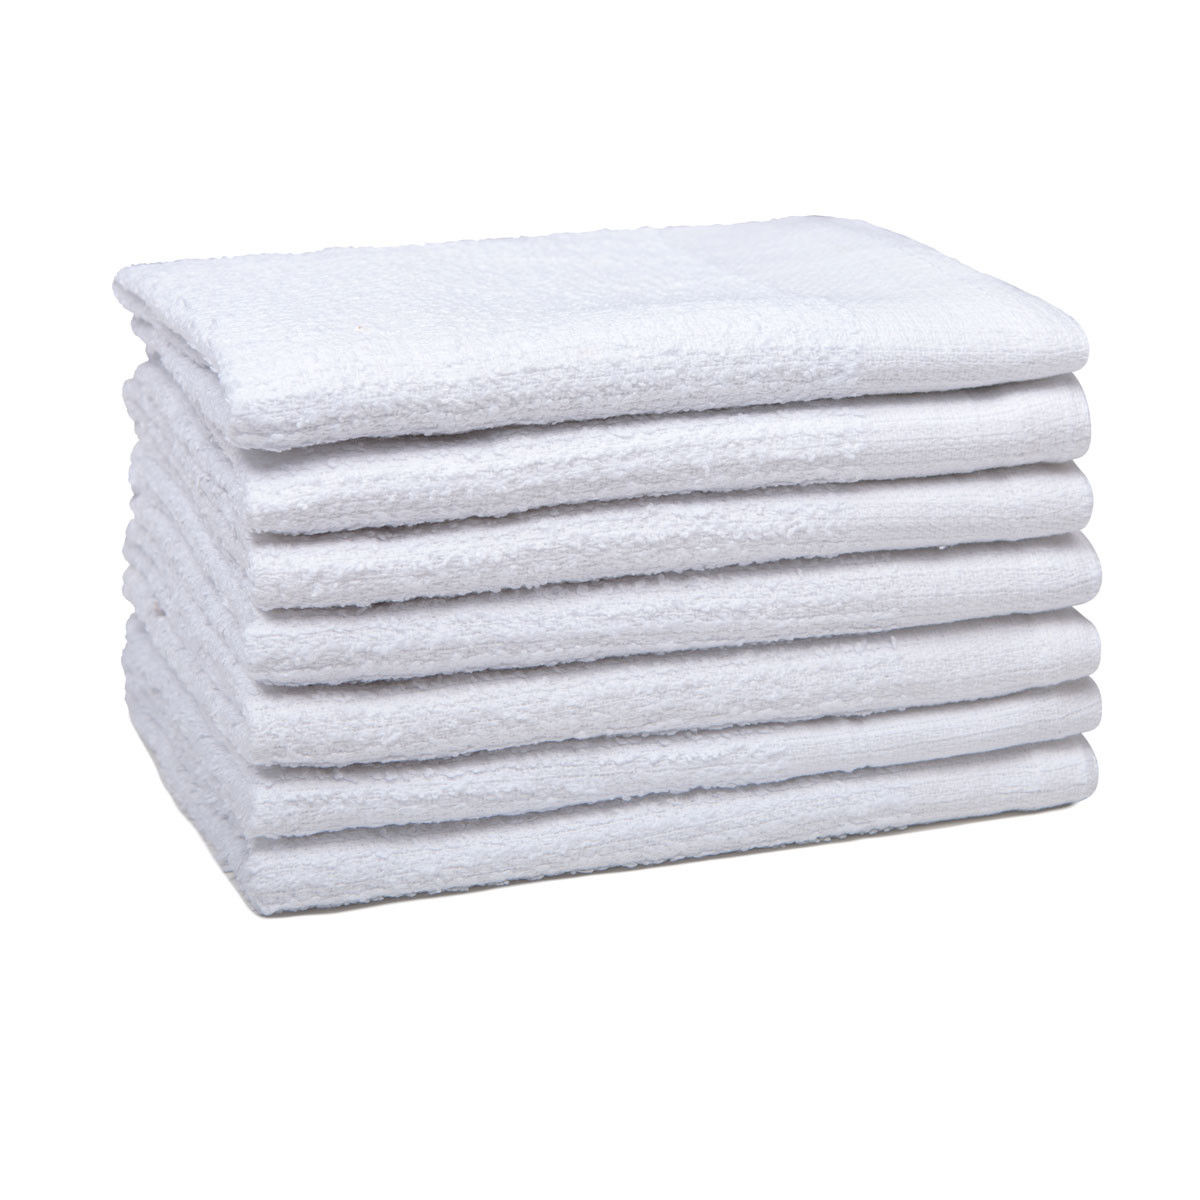 What material is used for Intralin's Wholesale Bar Mop Towels?